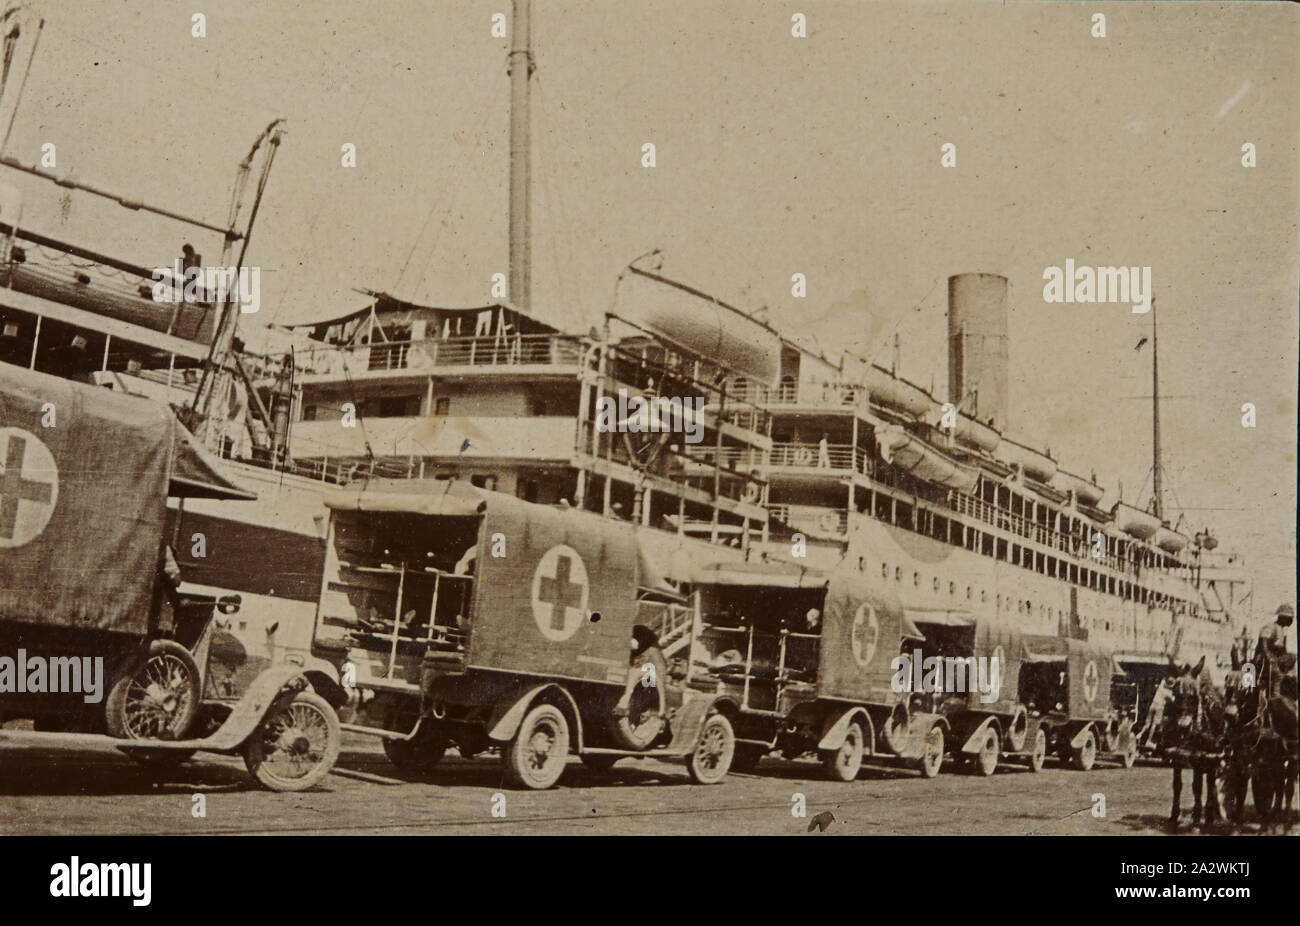 Photograph - Motor Ambulances & Troop Carrier Asturias, Alexandria, Egypt, circa 1915, Photograph of a line of covered motorized ambulances pulled up alongside the troop carrier Asturias at the wharf at Alexandria, Egypt, during World War I. From a photograph album created by Sergeant John Lord and documents his time in Egypt. The album was created in a lined notebook/diary type book and John Lord completely filled the album with photographs. All of the photographs are numbered Stock Photo